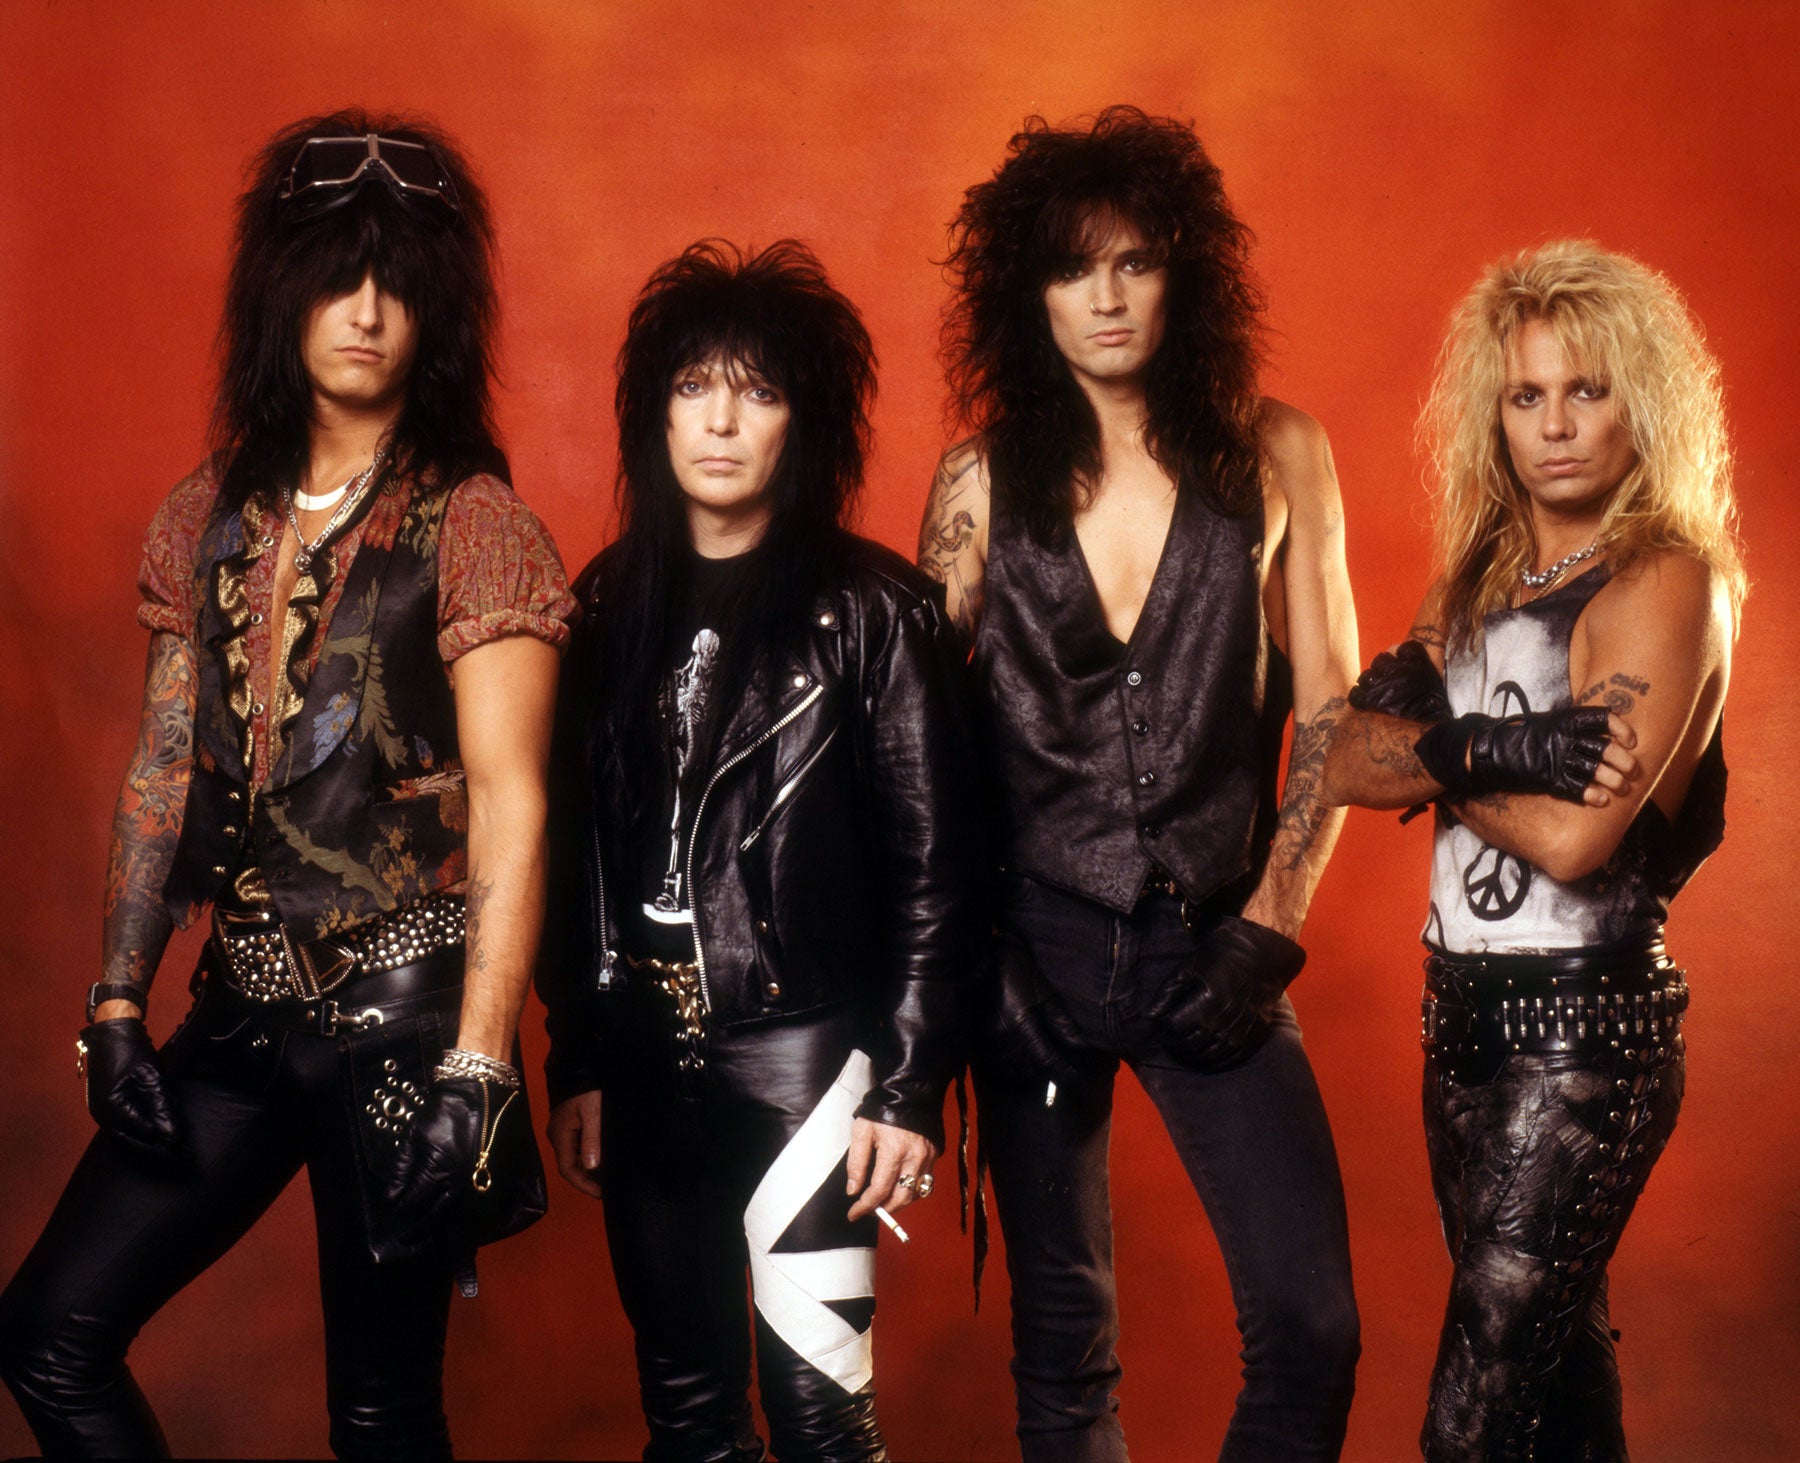 Promotional photo shoot outtake of Motley Crue for Dr. Feelgood circa 1989